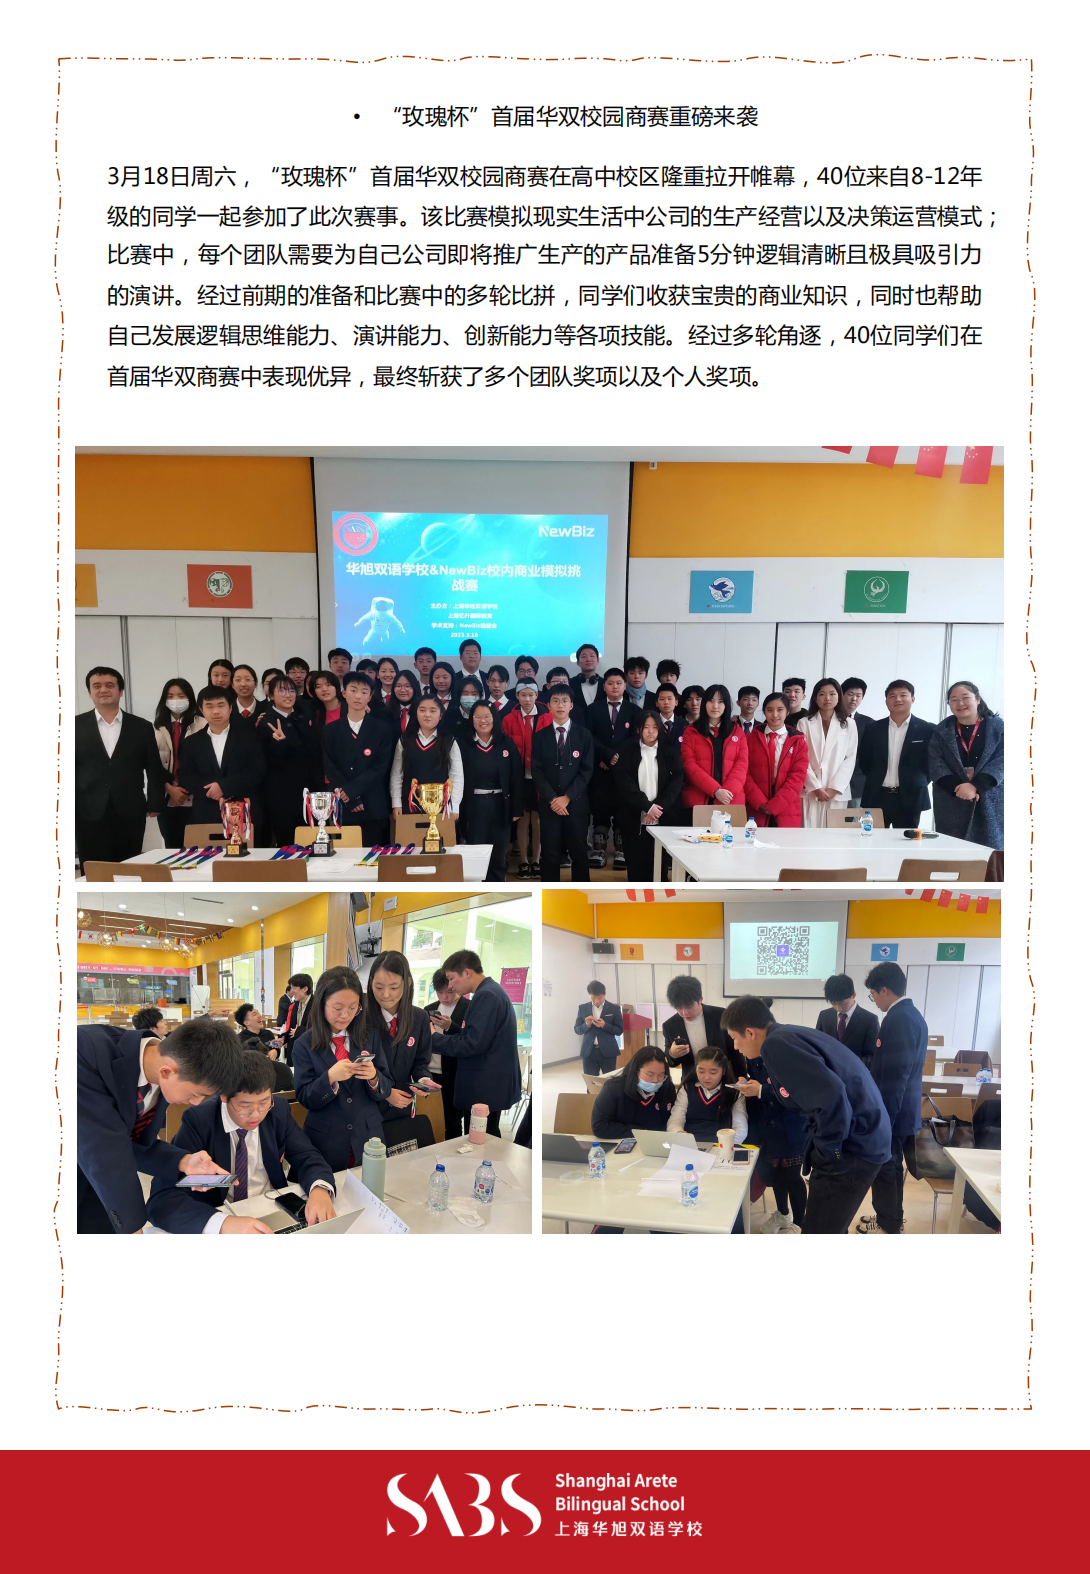 HS 3rd Issue Newsletter pptx（Chinese）_18.png